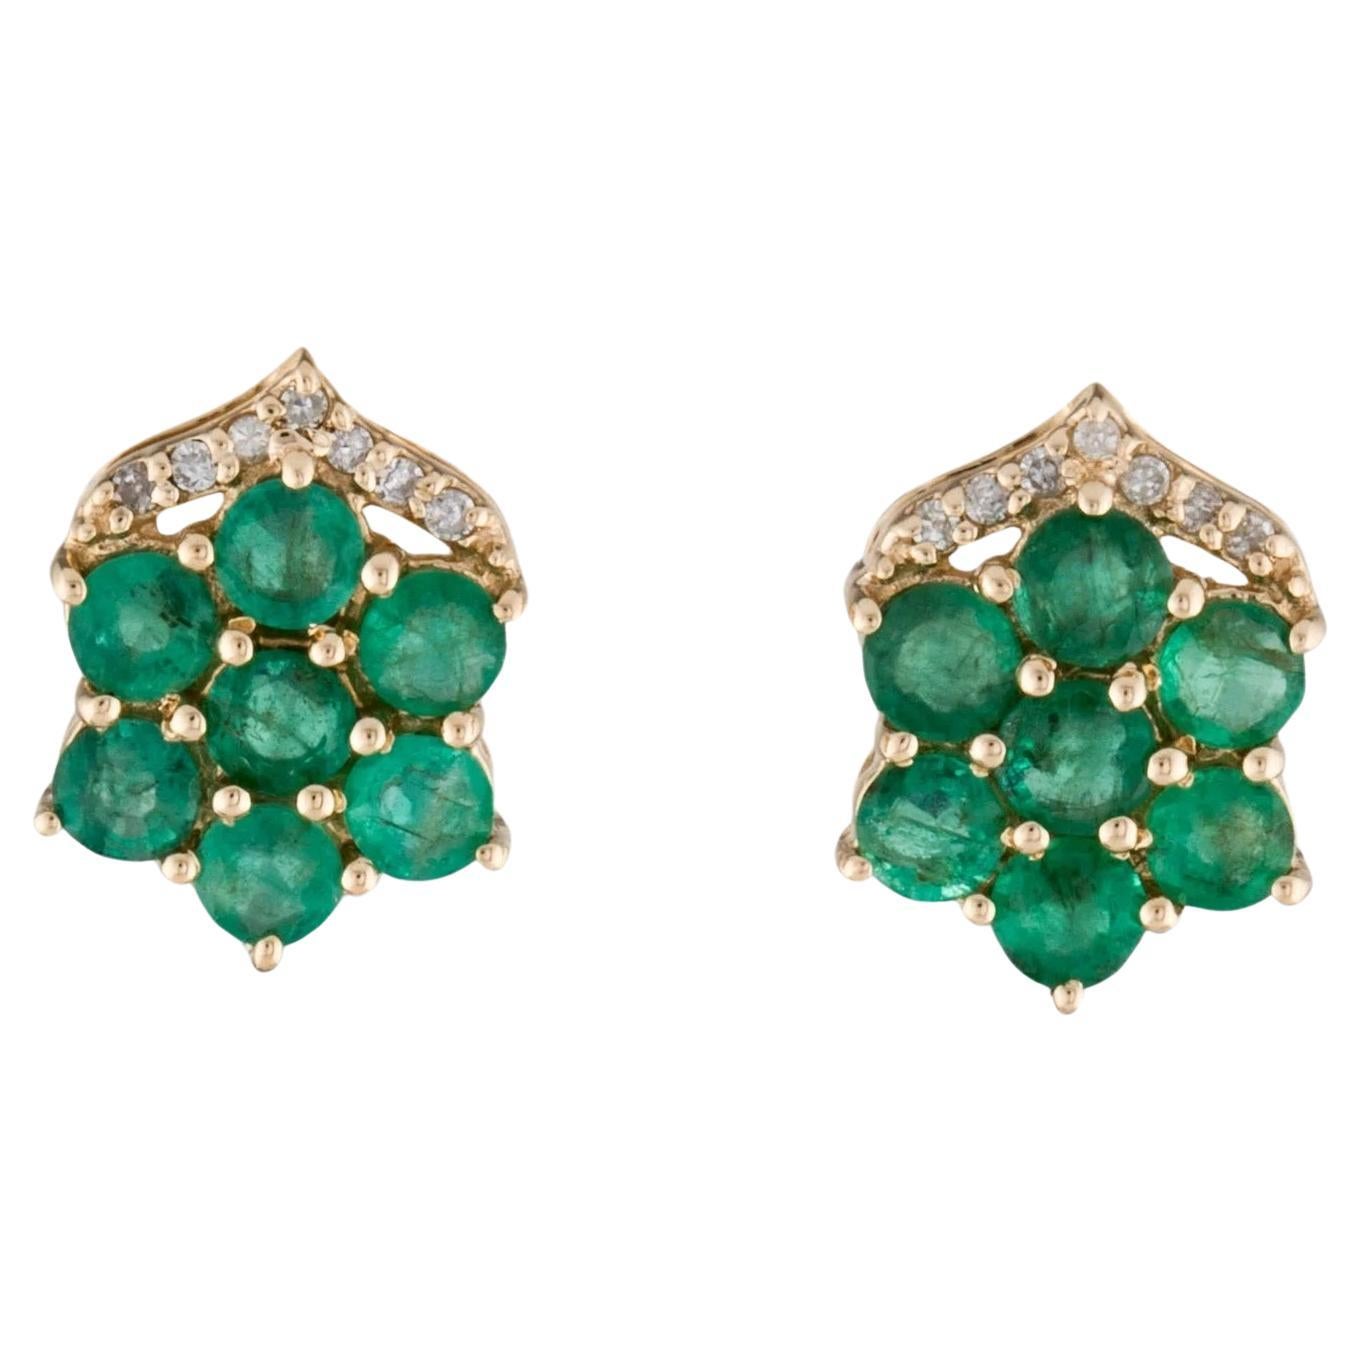 Elegant 14K Yellow Gold Earrings with Emerald and Diamond Accents